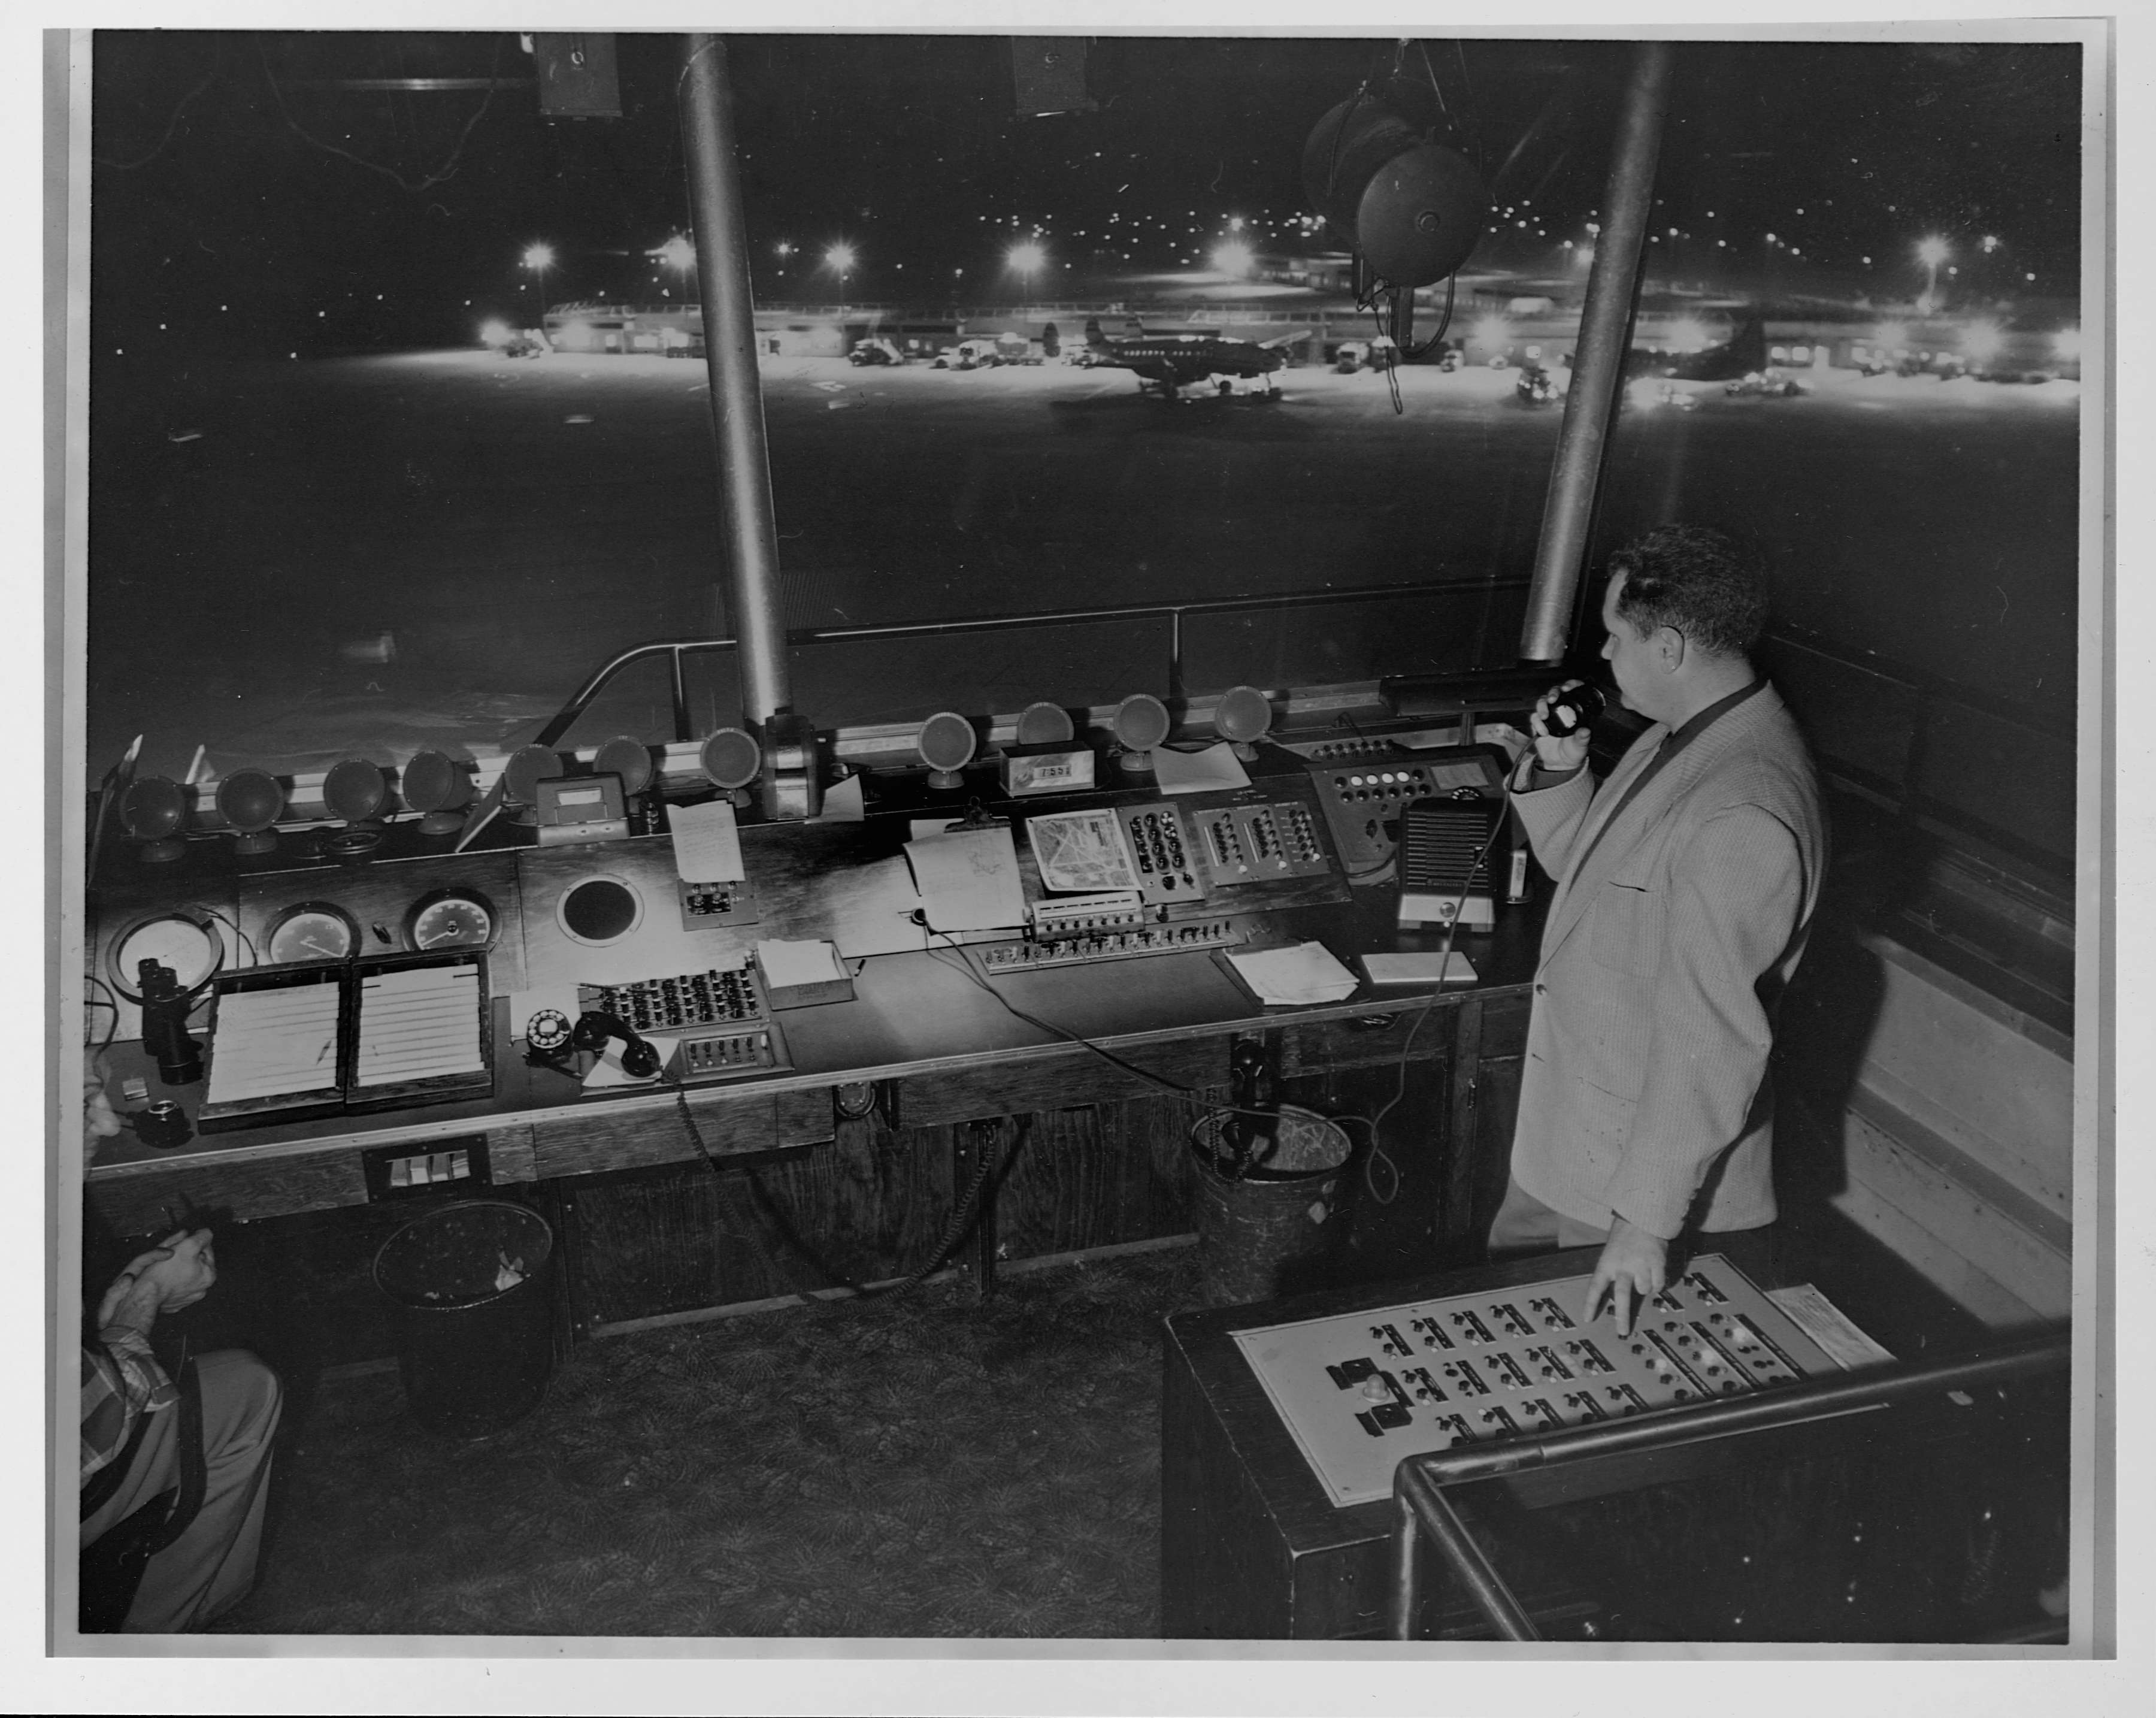 Air Traffic Control Worker in Tower